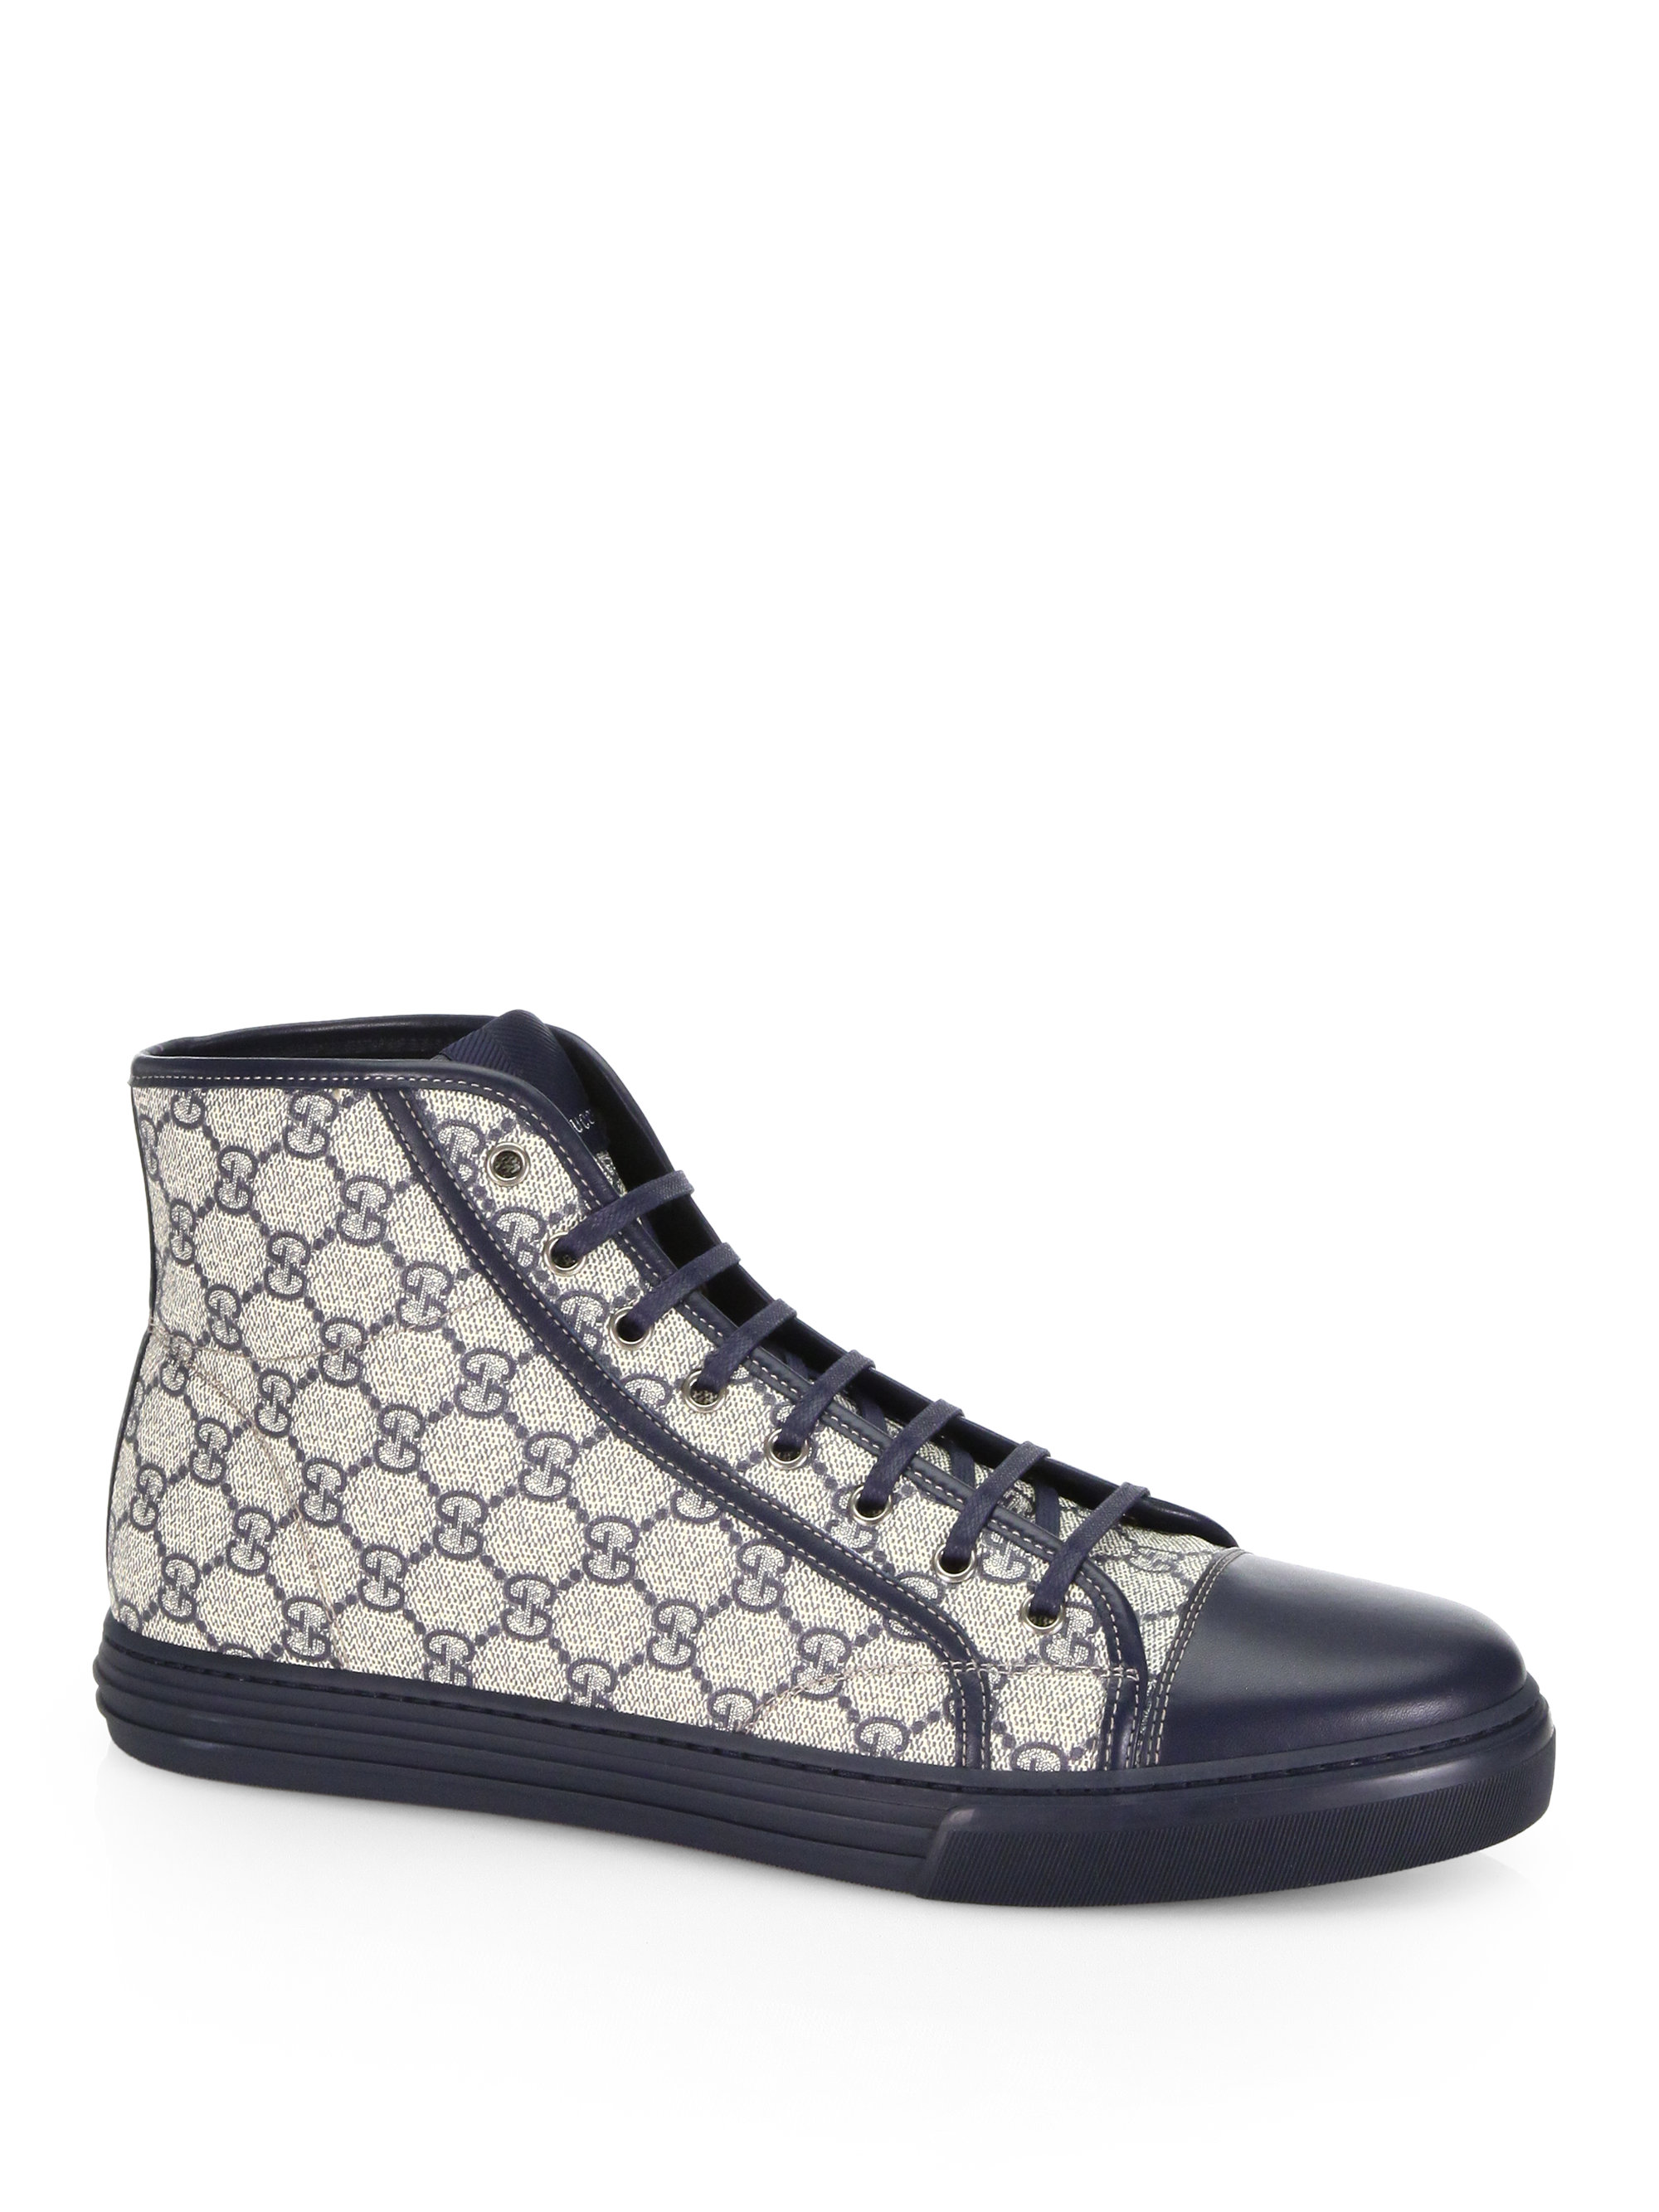 Gucci Gg High Top Sneakers Hotsell, SAVE 41% - aveclumiere.com